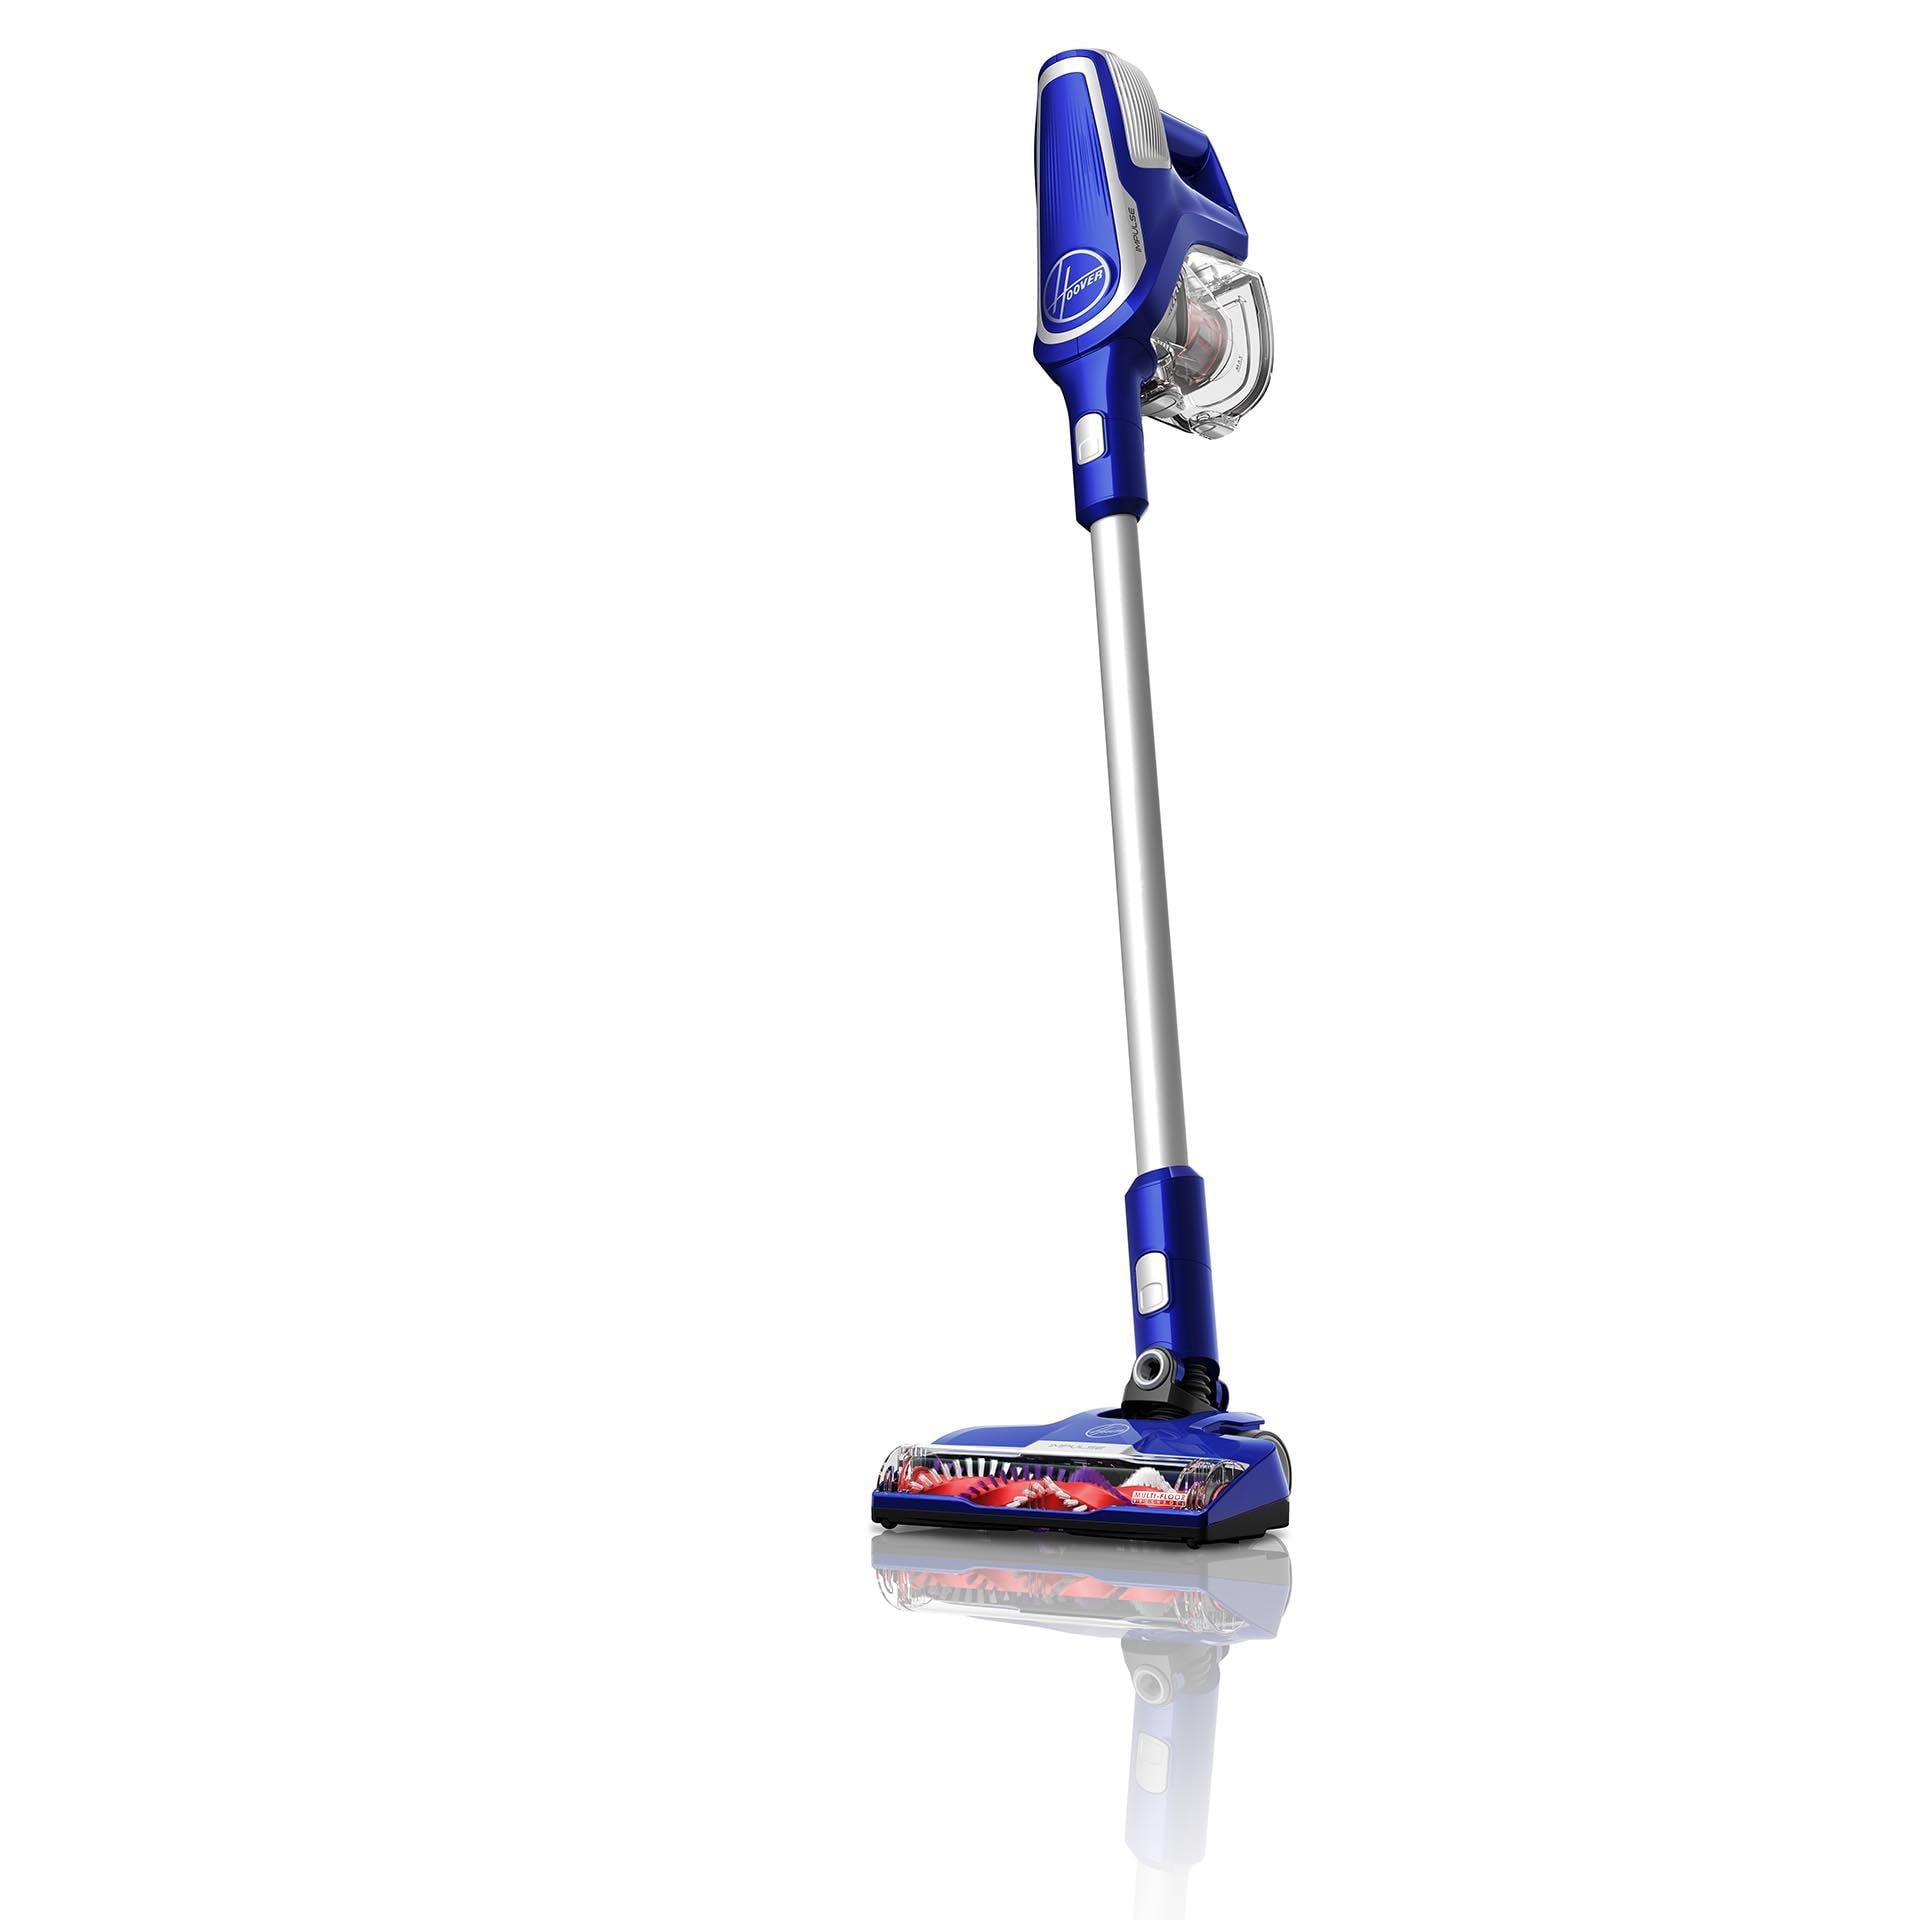 Hoover Impulse Cordless Stick Vacuum Cleaner BH53020 Dirt Cup With Filter 